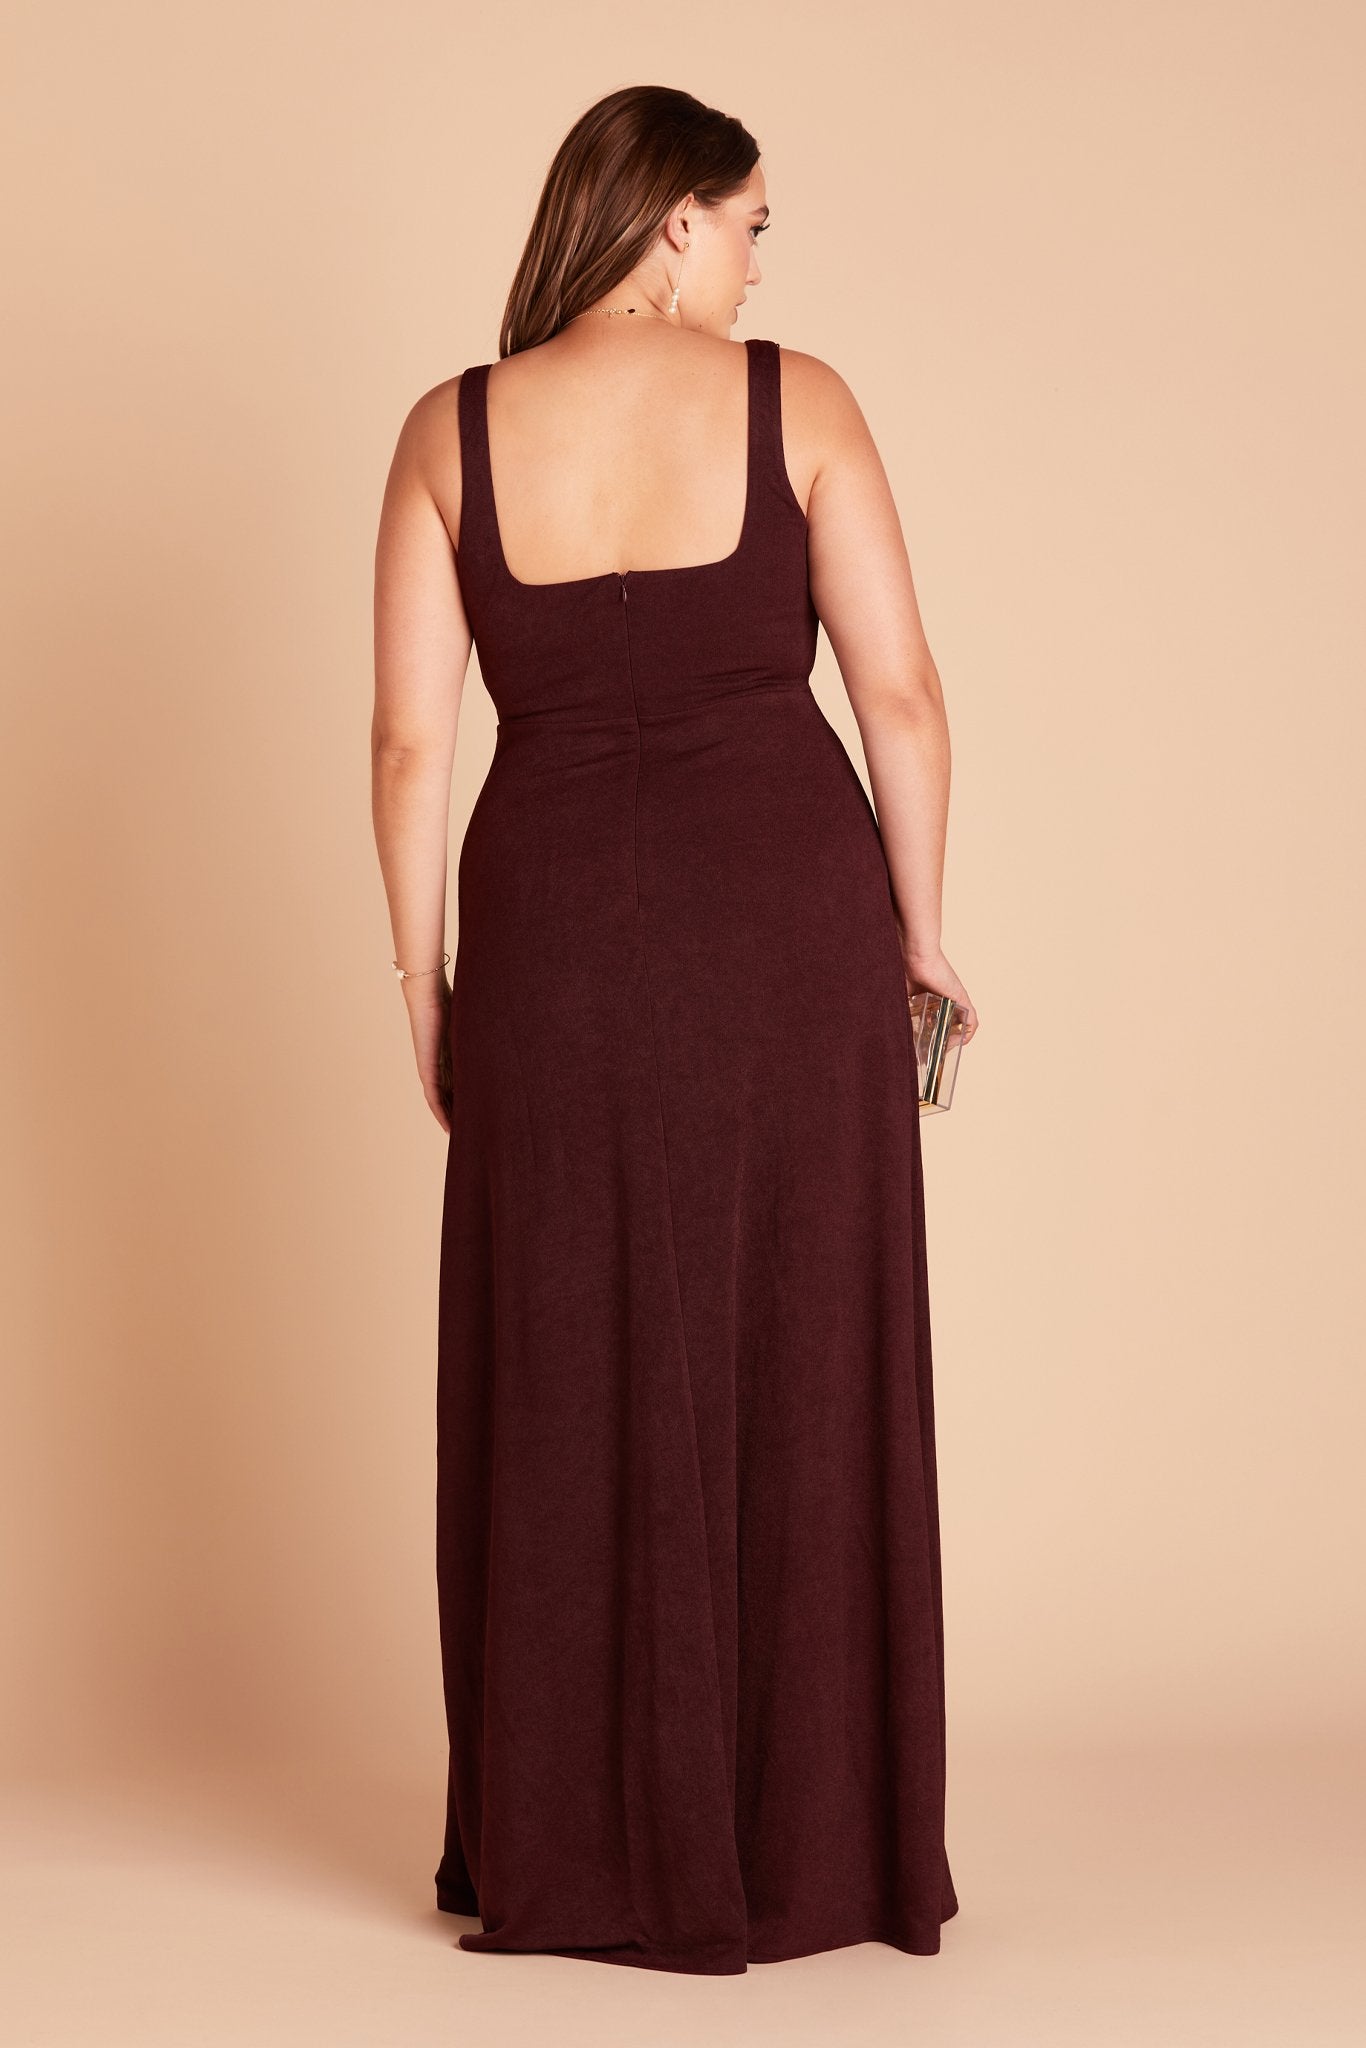 Alex convertible plus size bridesmaid dress with slit in cabernet burgundy crepe by Birdy Grey, back view